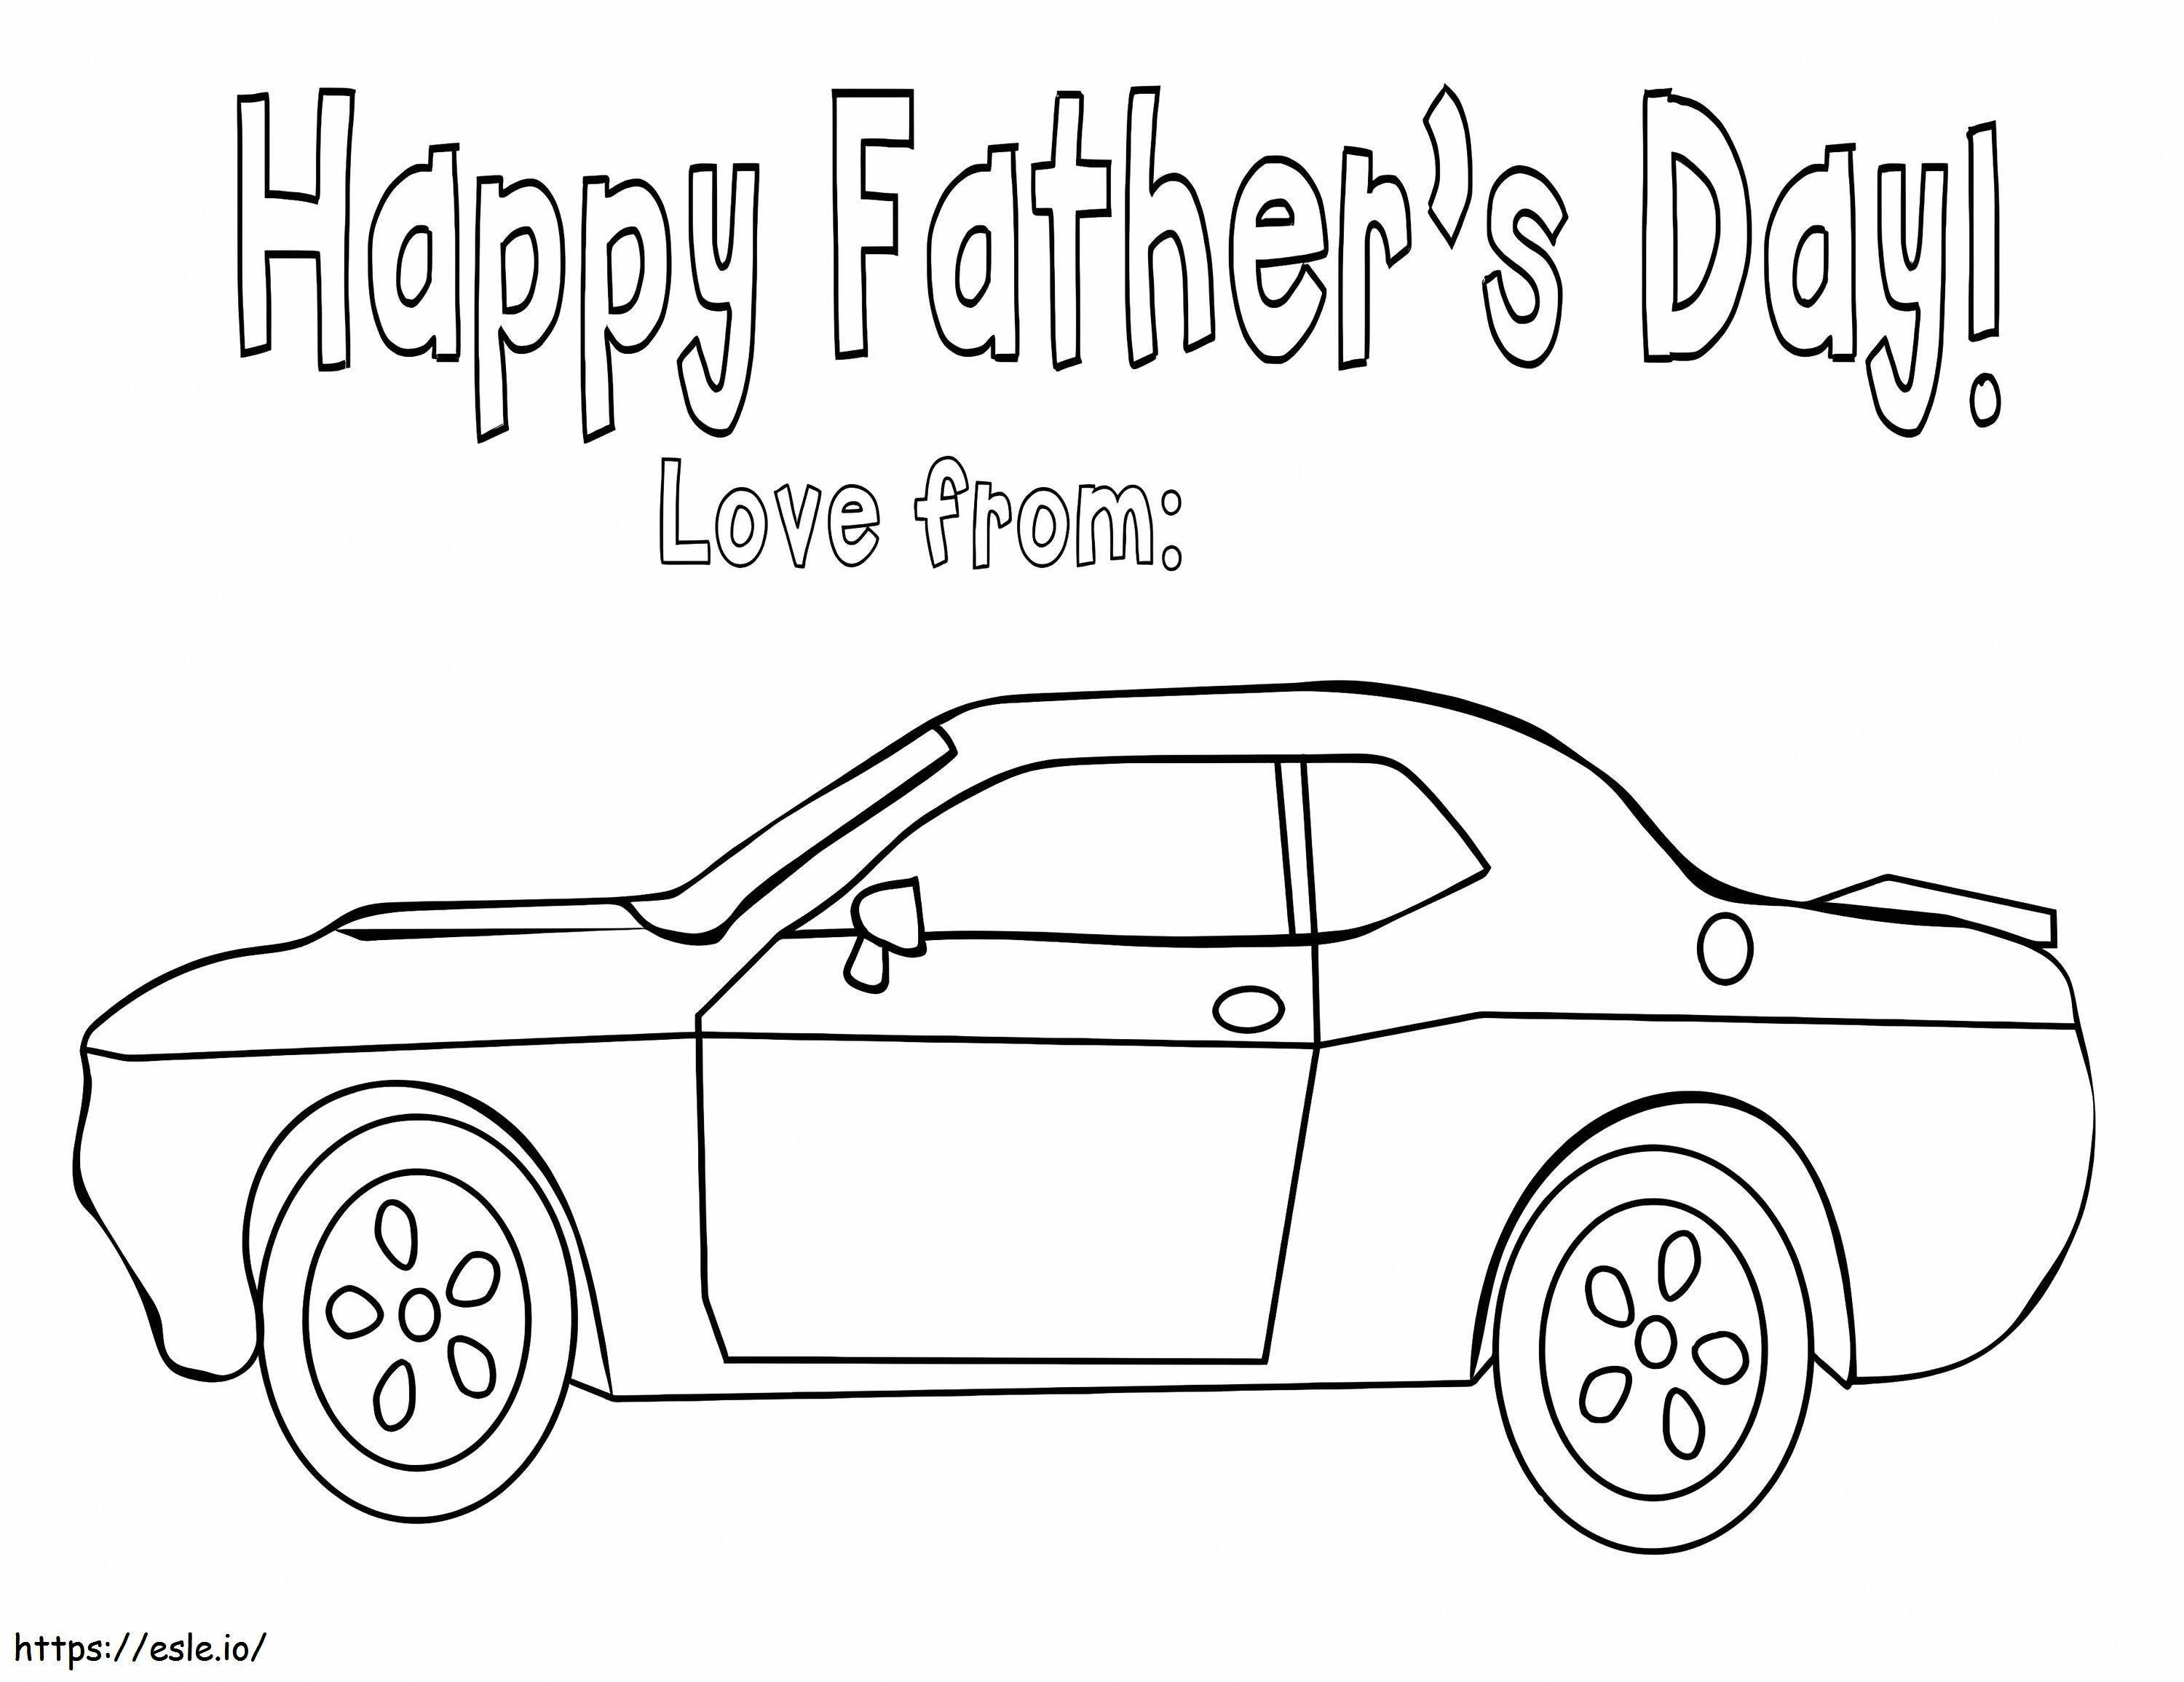 Fathers Day To Print coloring page